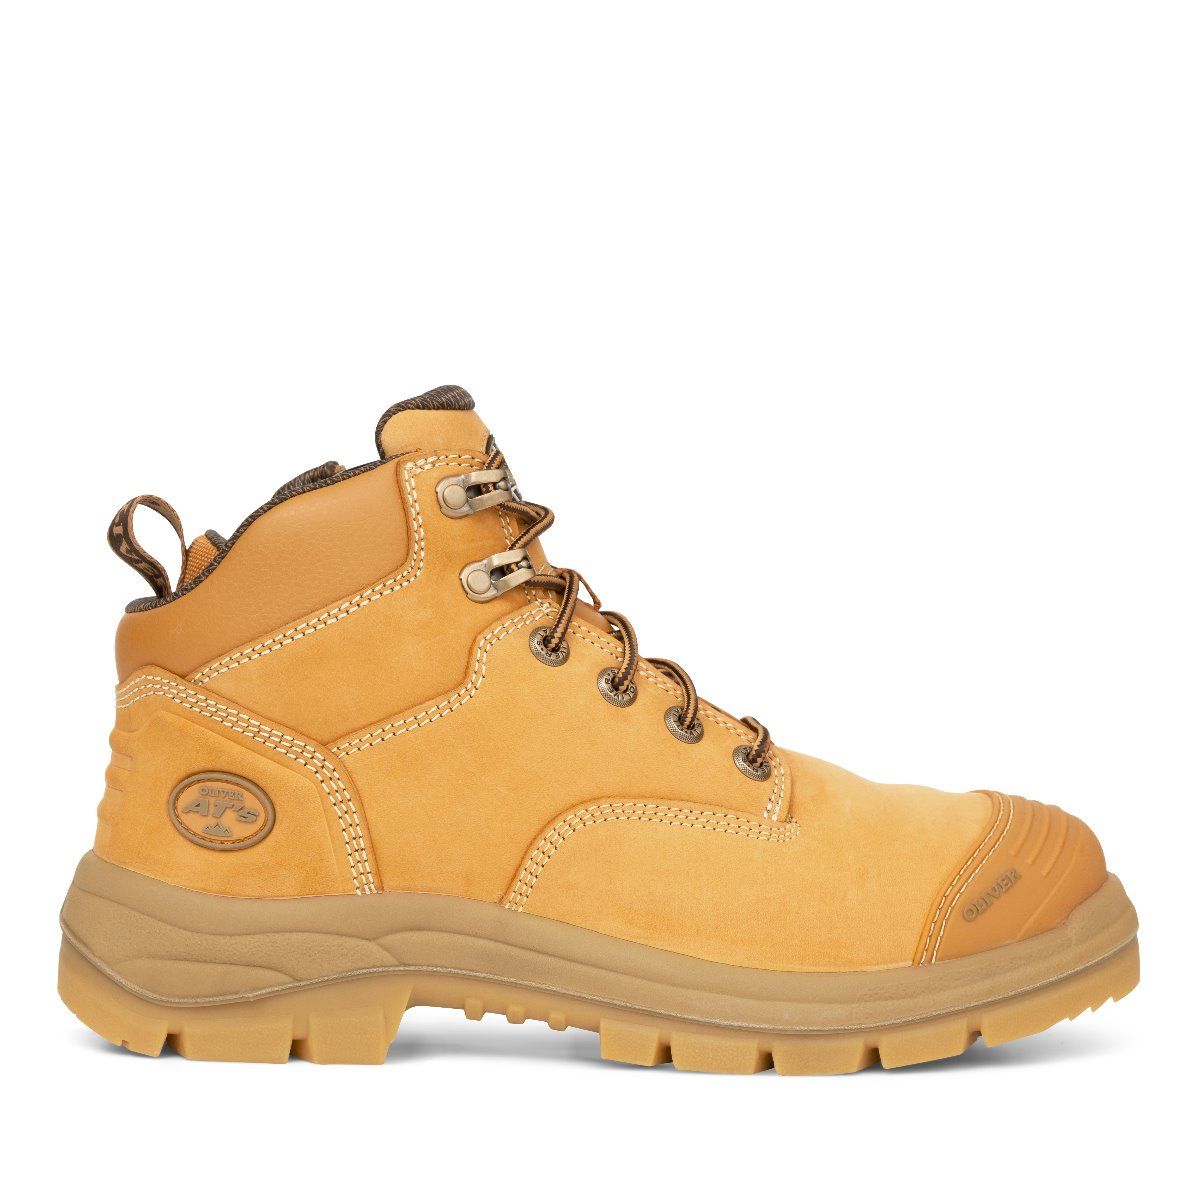 Oliver Mens 55-330Z 130mm Zip at Boots Steel Bump Nitrile Wheat 10